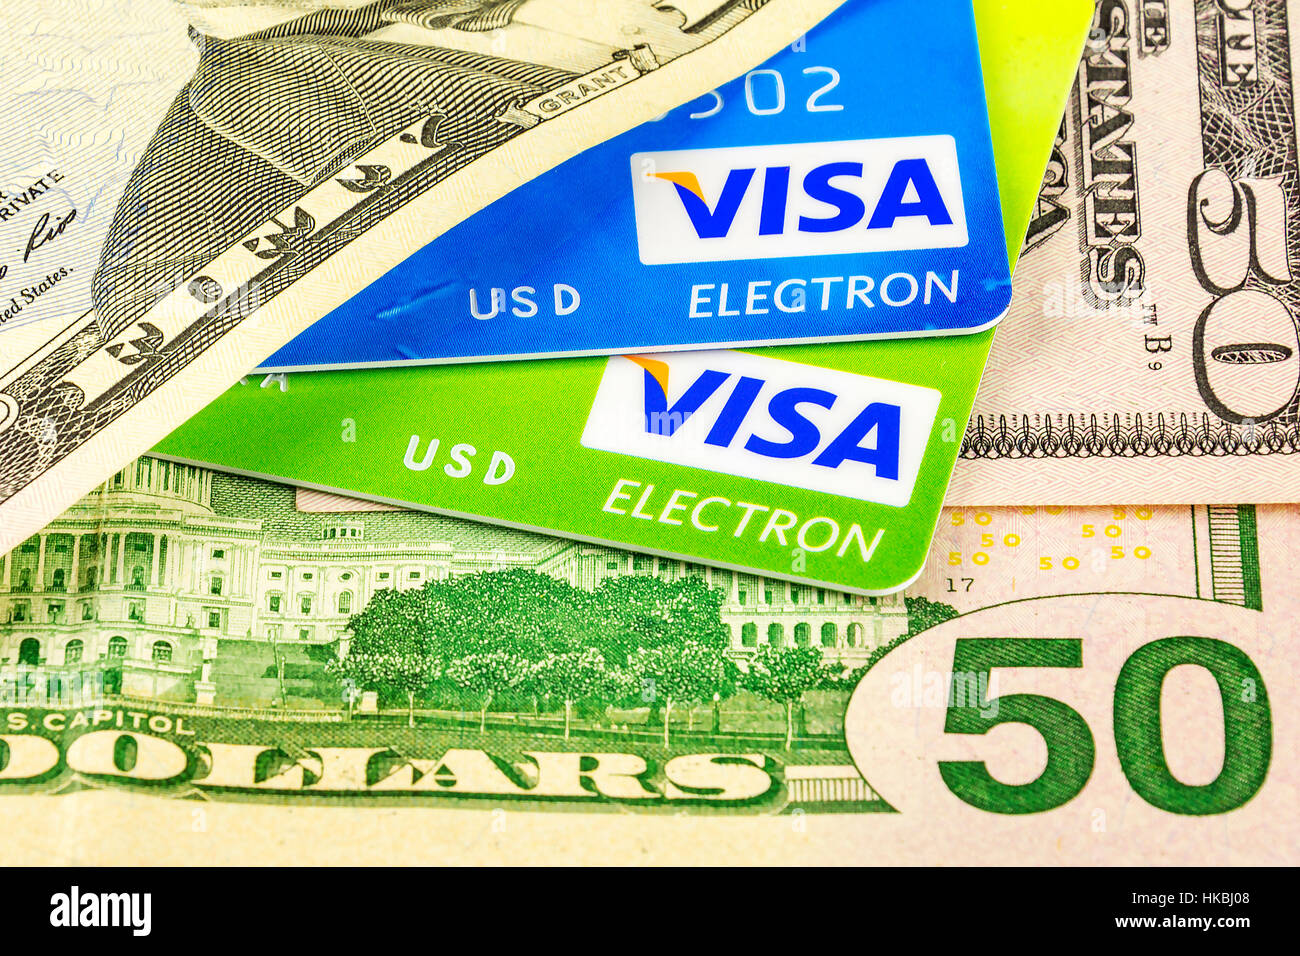 Part of the bank card payment system Visa and Parts dollar bills of different denomination Stock Photo